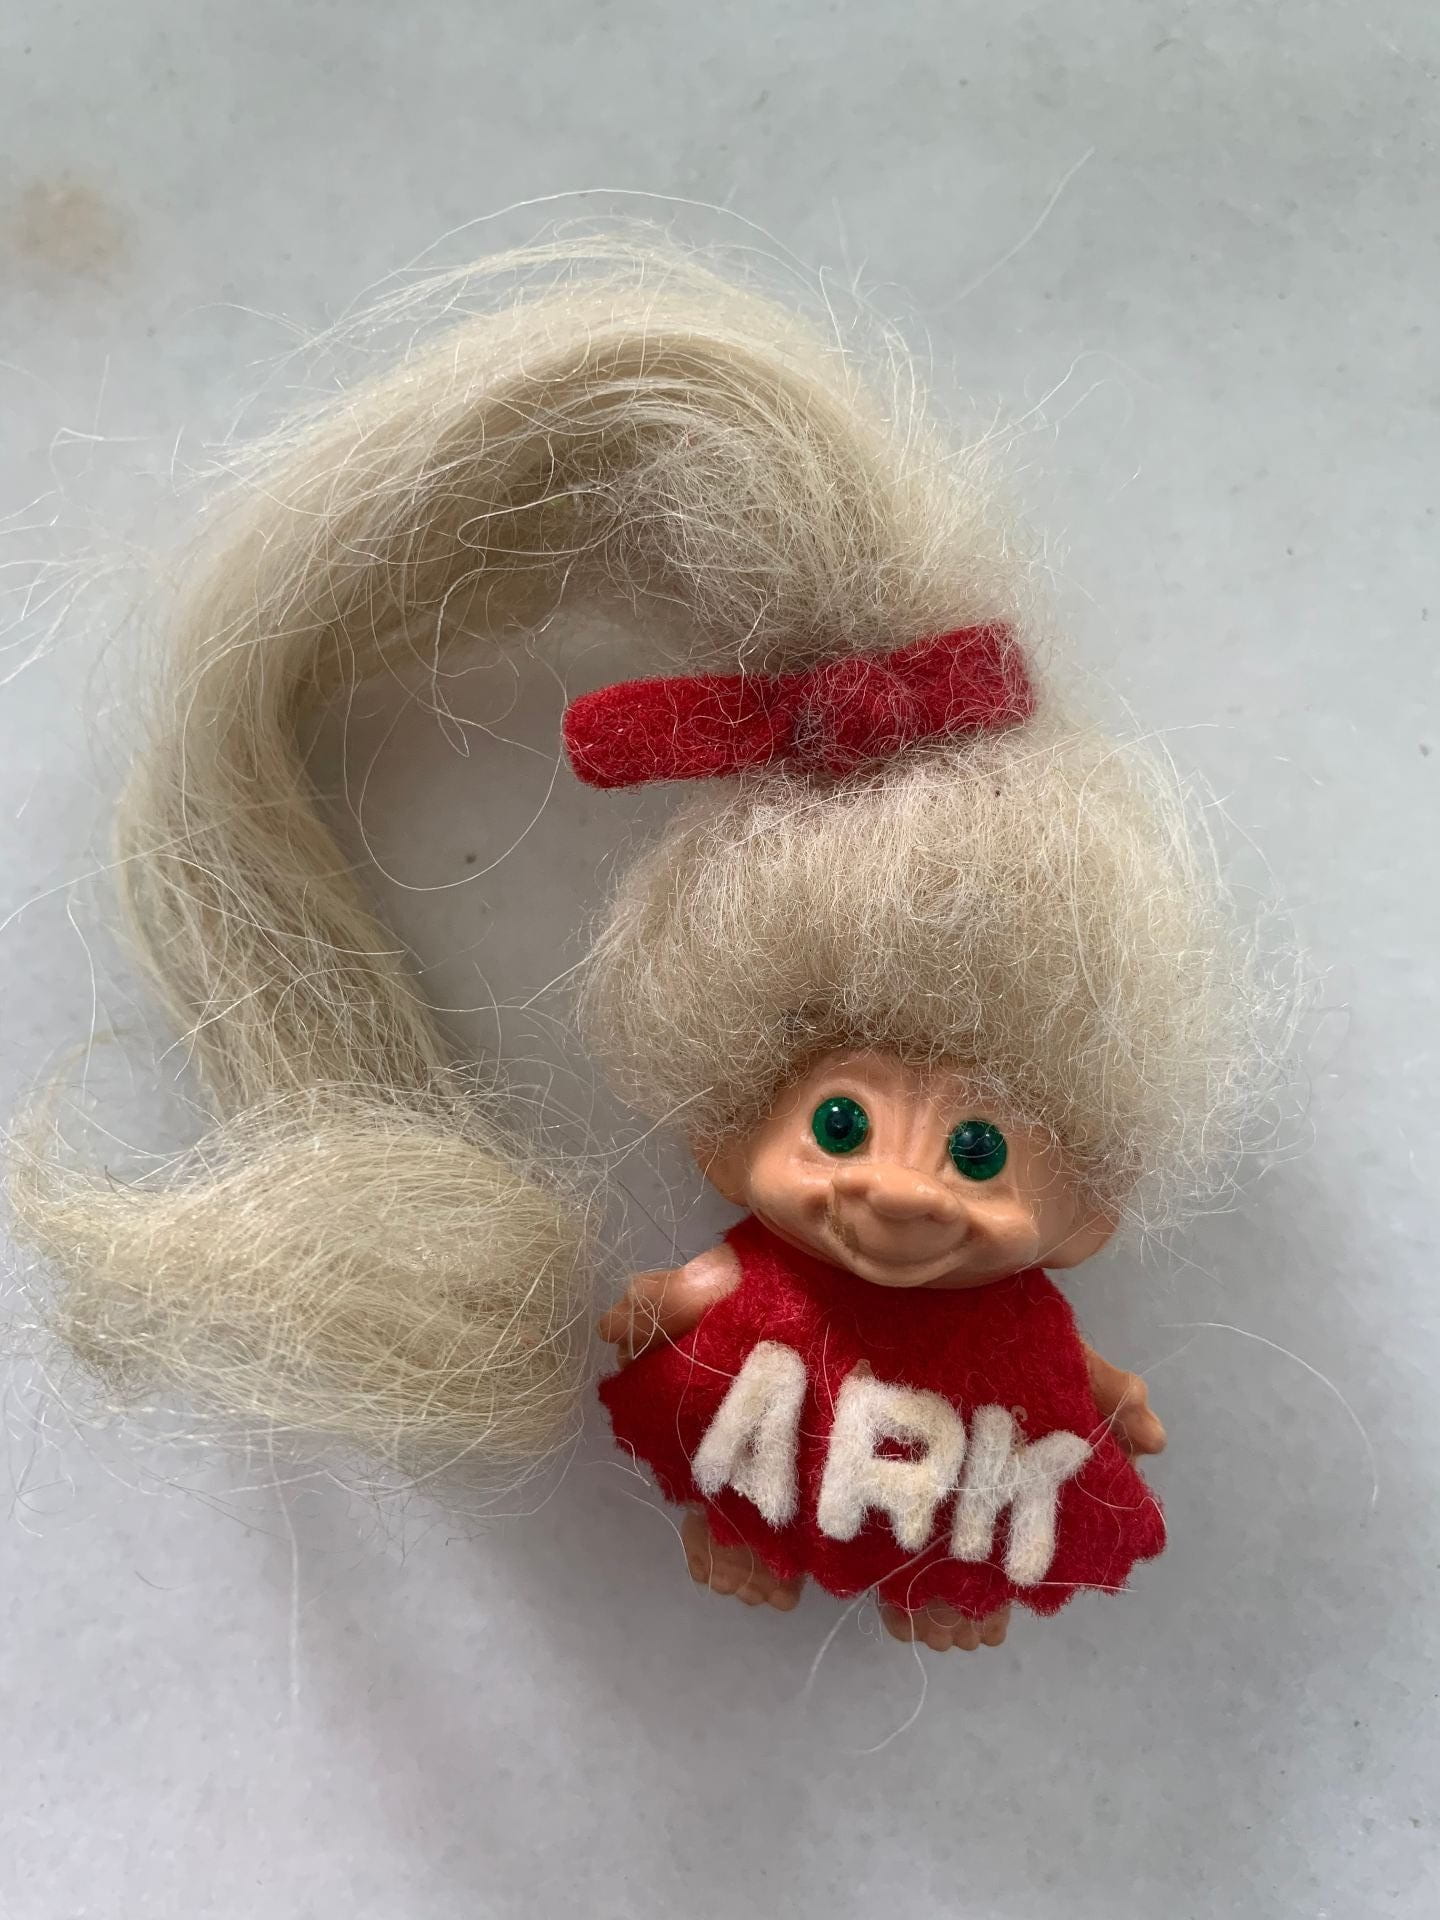 A small troll doll with long blonde hair held in a ponytail with a red bow. The doll wears a red dress that says "ARK" across it.